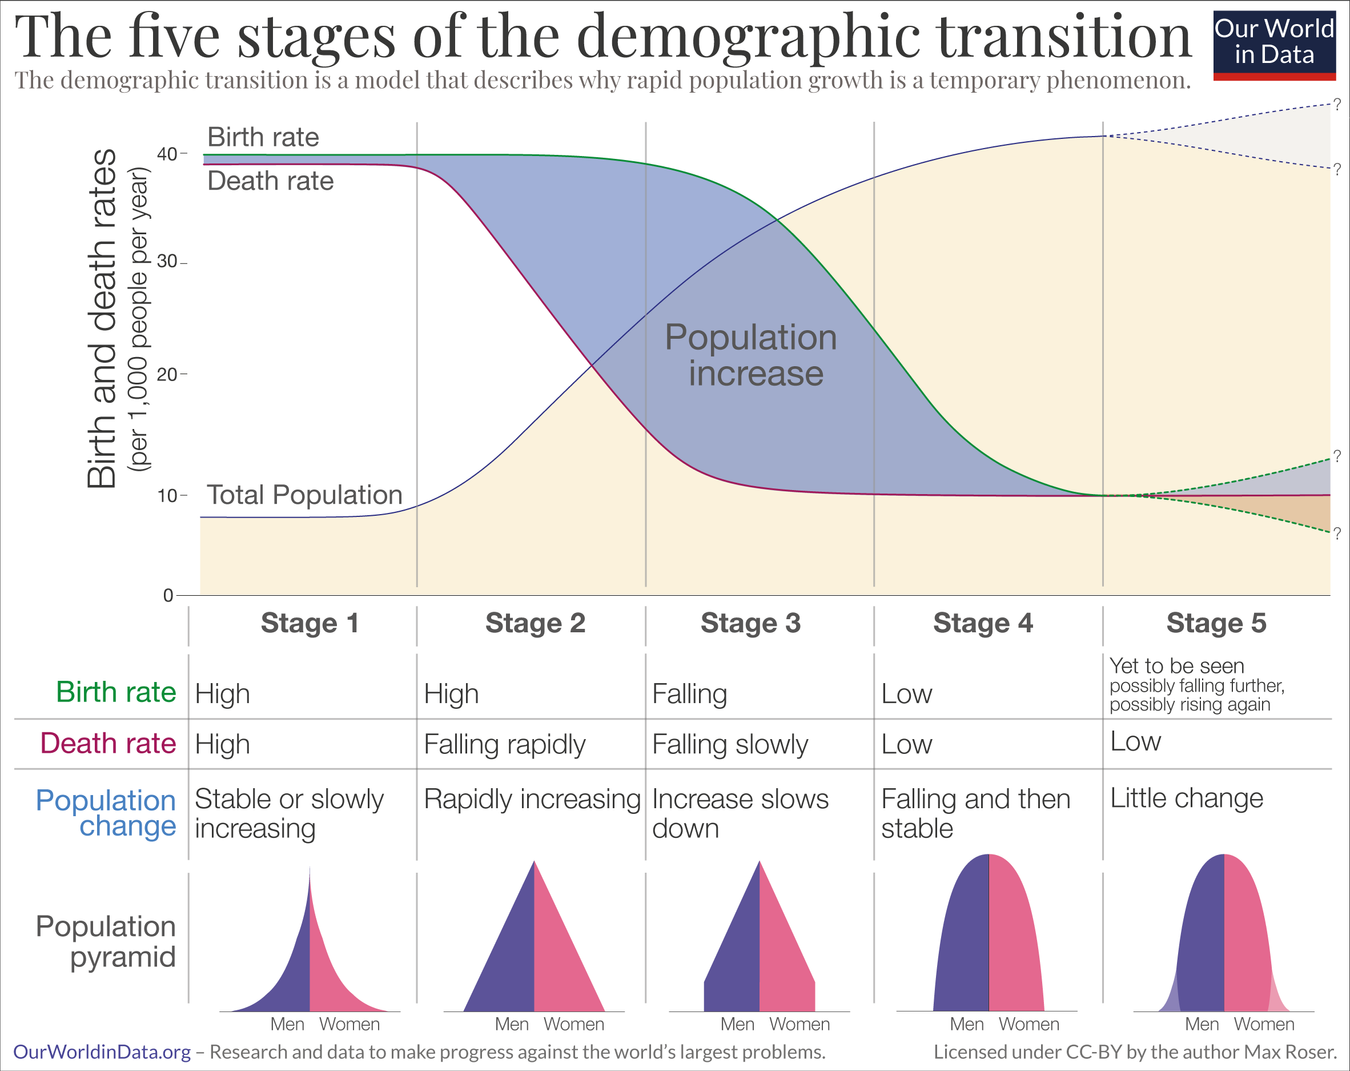 A line graph with two lines, one for birth rate and one for death rate, and a shaded area for population increase. The x-axis is labeled "Stage 1" through "Stage 5 (Yet to be seen)," and the y-axis is labeled "Birth rate" and "Death rate" (with values ranging from 0 to 40). The graph shows that birth rates and death rates are high in Stage 1, with a stable or slowly increasing population. In Stage 2, death rates fall rapidly, leading to rapid population increase. In Stage 3, birth rates start to fall, and population growth slows. In Stage 4, birth rates and death rates are both low, and the population falls and then stabilizes. Stage 5 is unknown, but birth rates may fall further and death rates may rise again.